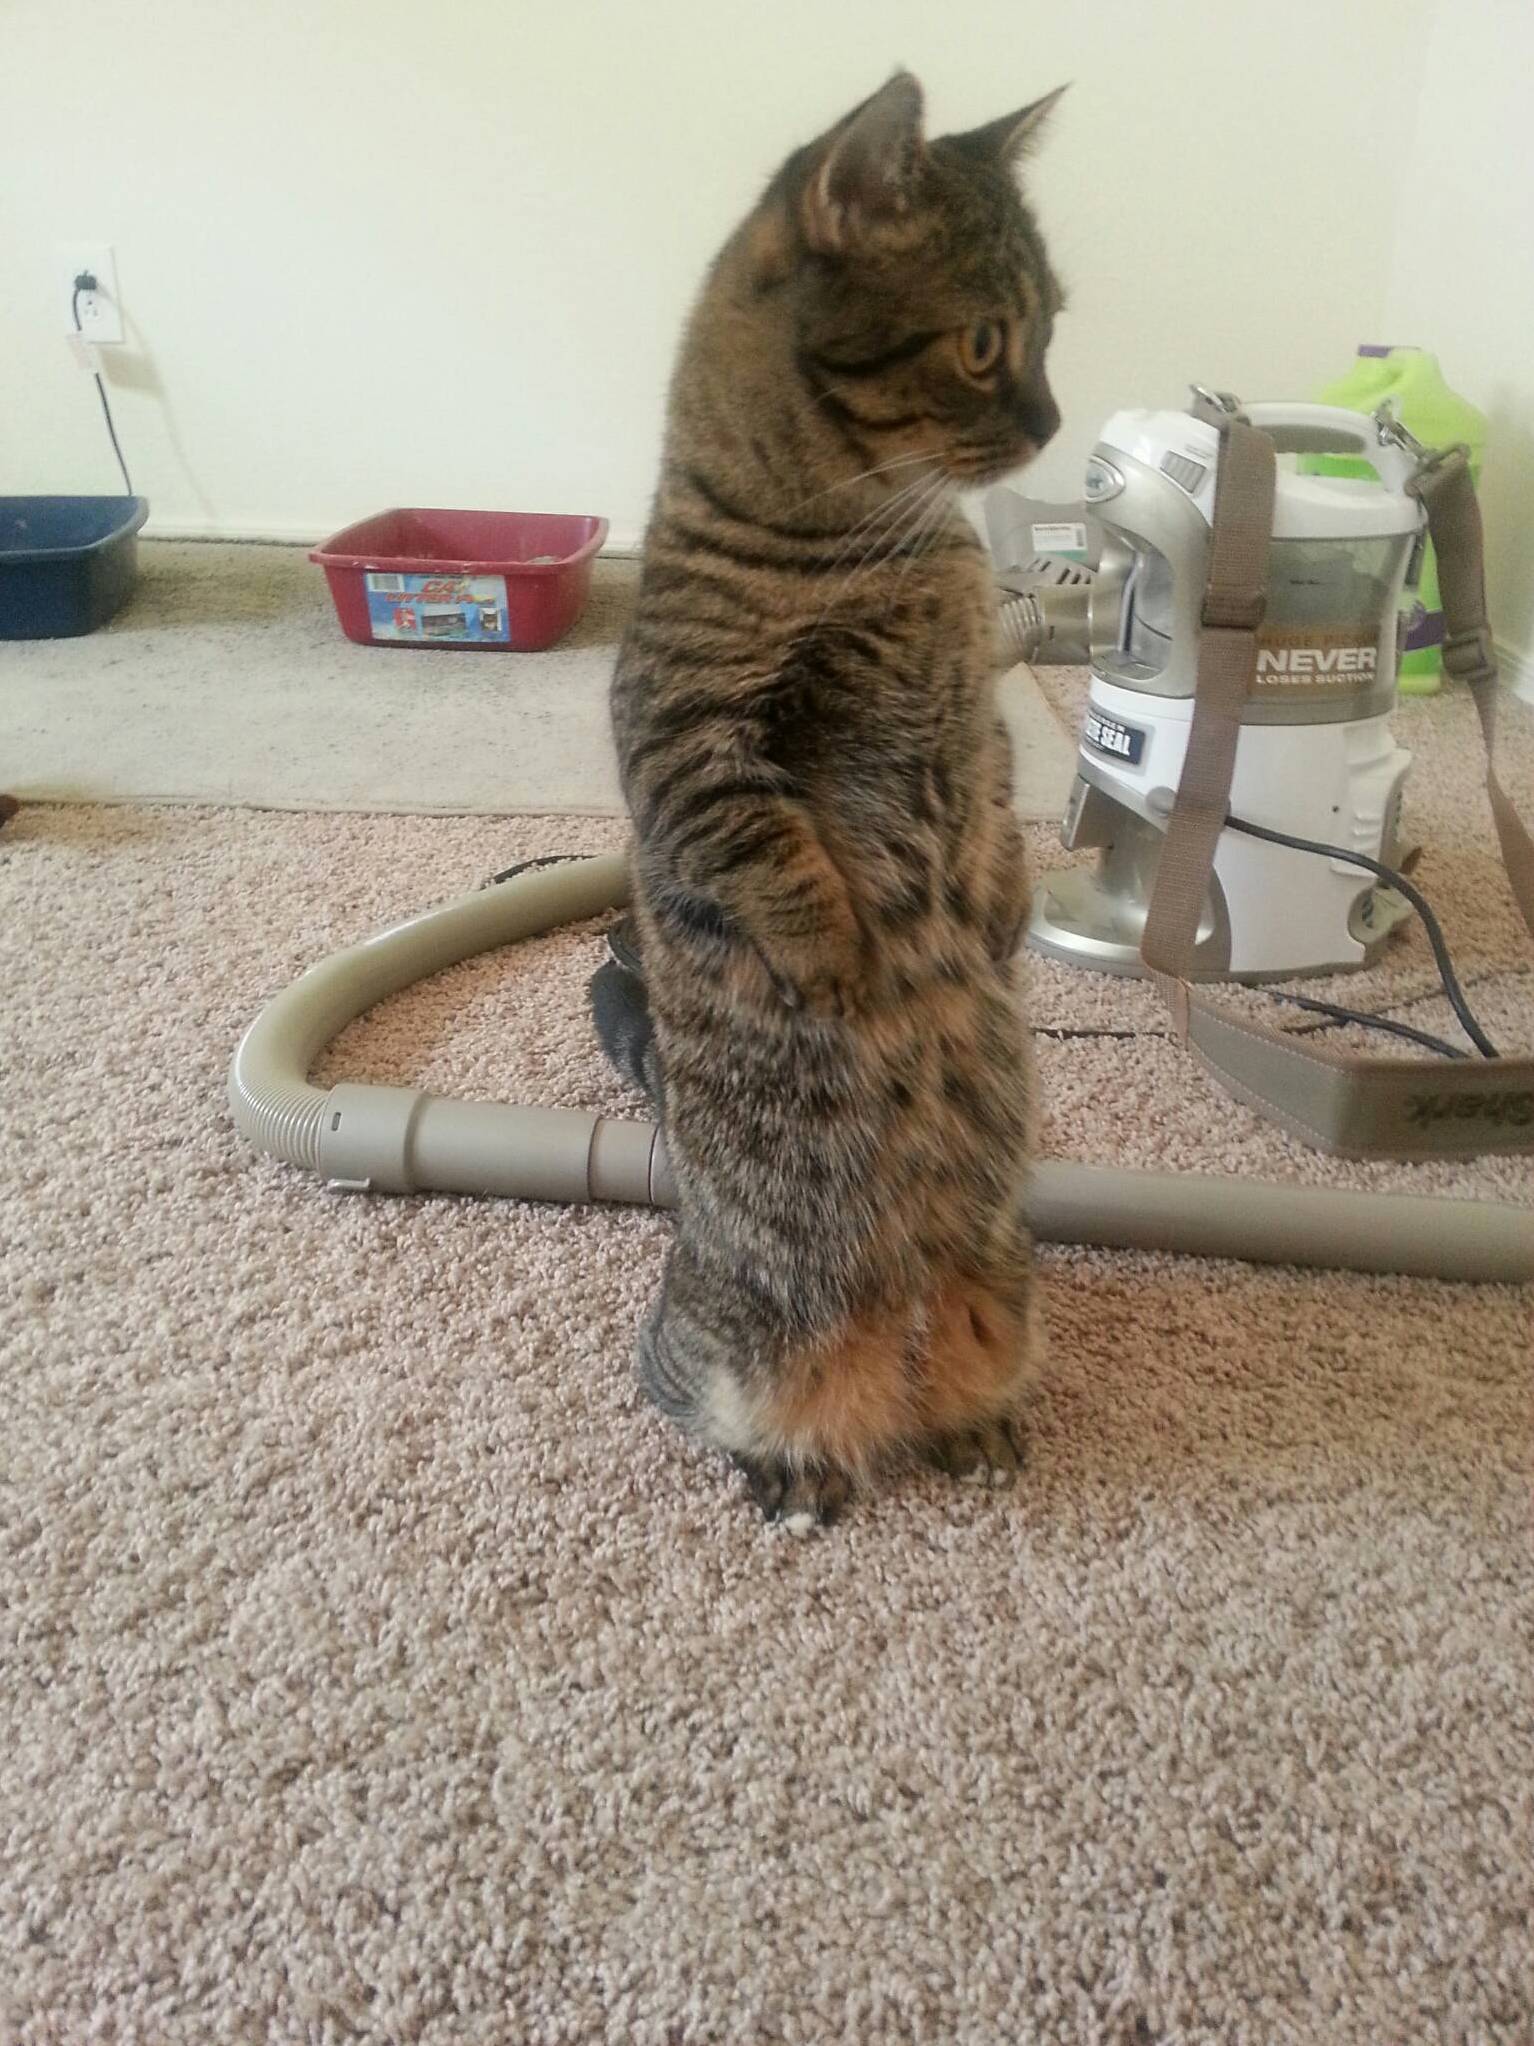 Our munchkin cat spends a lot of his time standing up